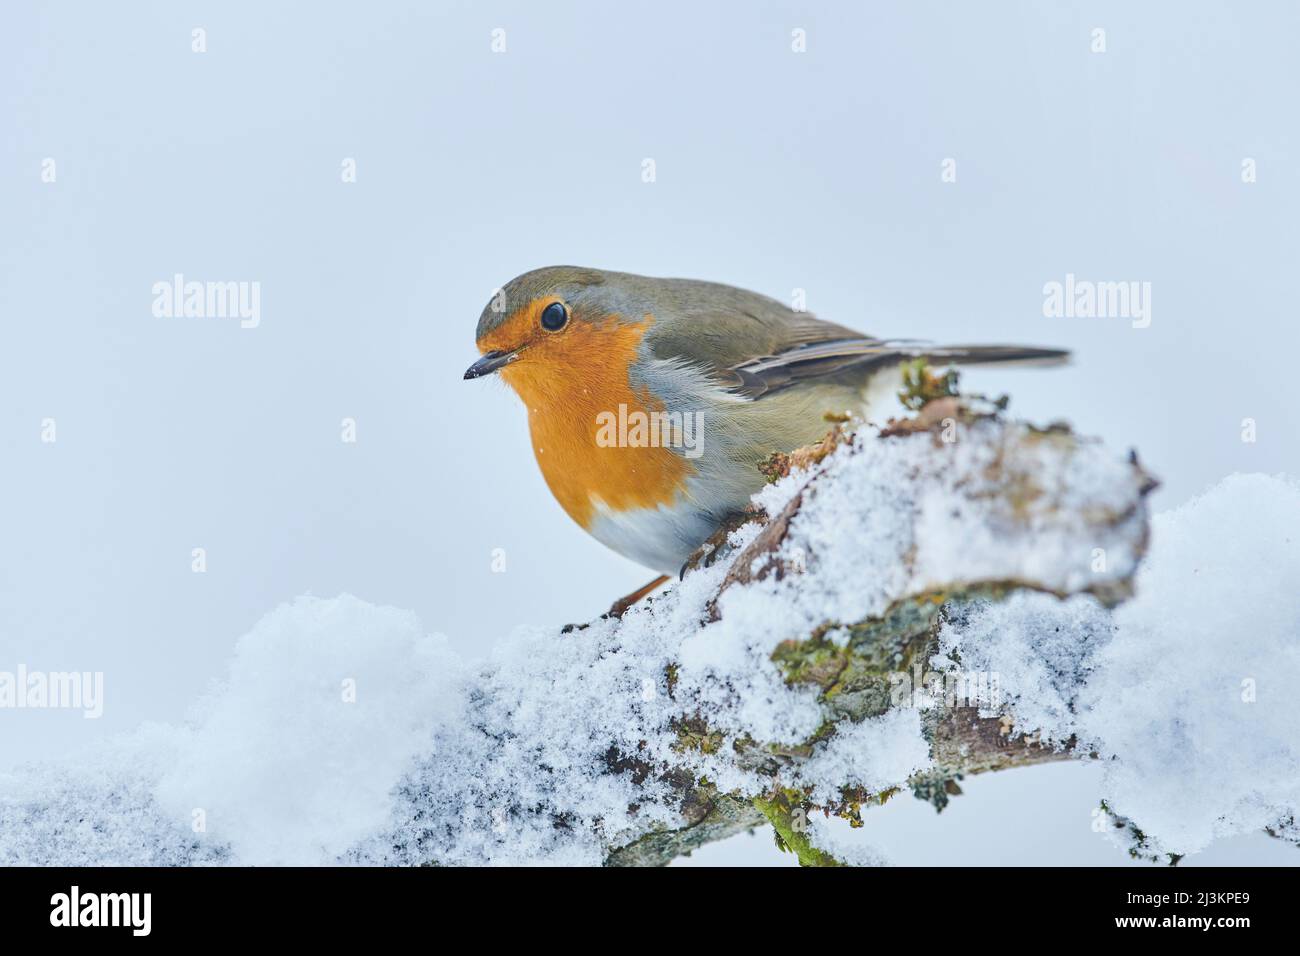 European robin (Erithacus rubecula) perched on a snowy branch; Bavaria, Germany Stock Photo